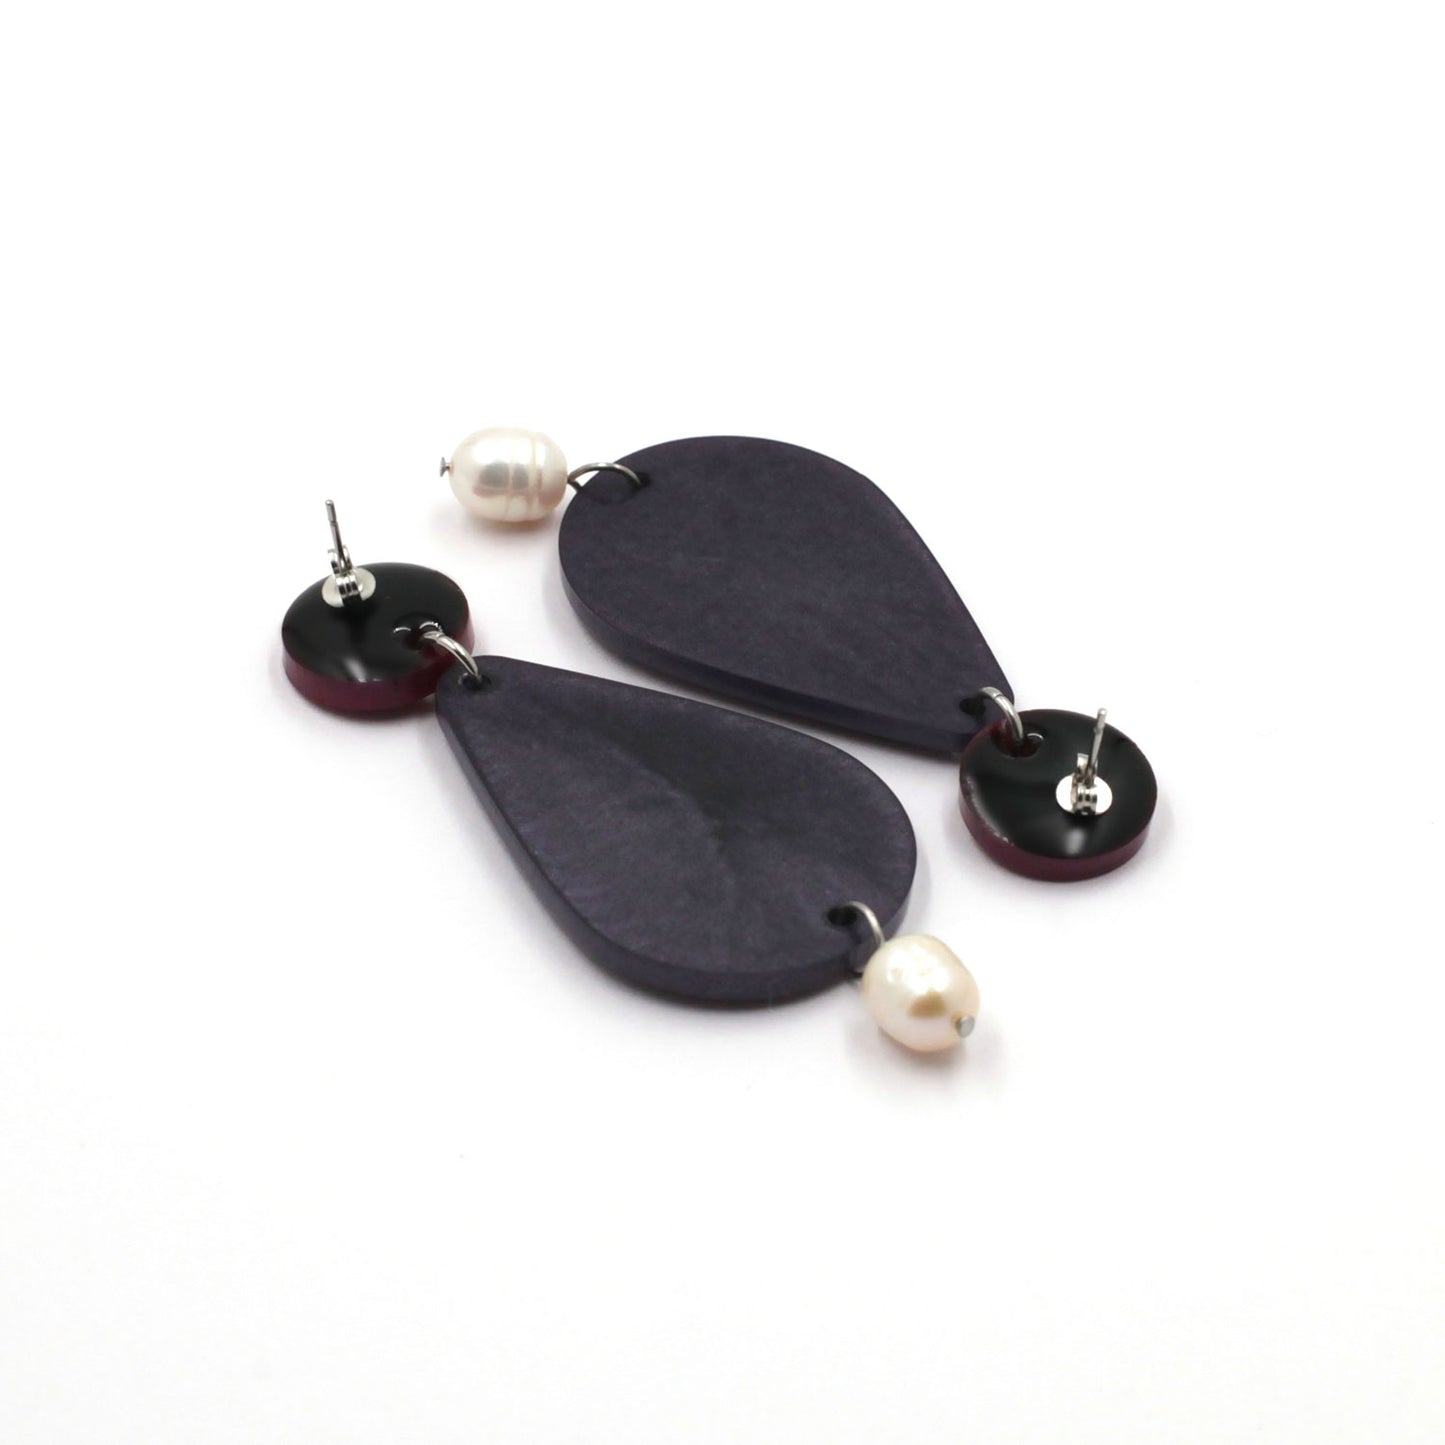 back of stud earrings composed by freshwater pearls, purple pear and a dot on a white background